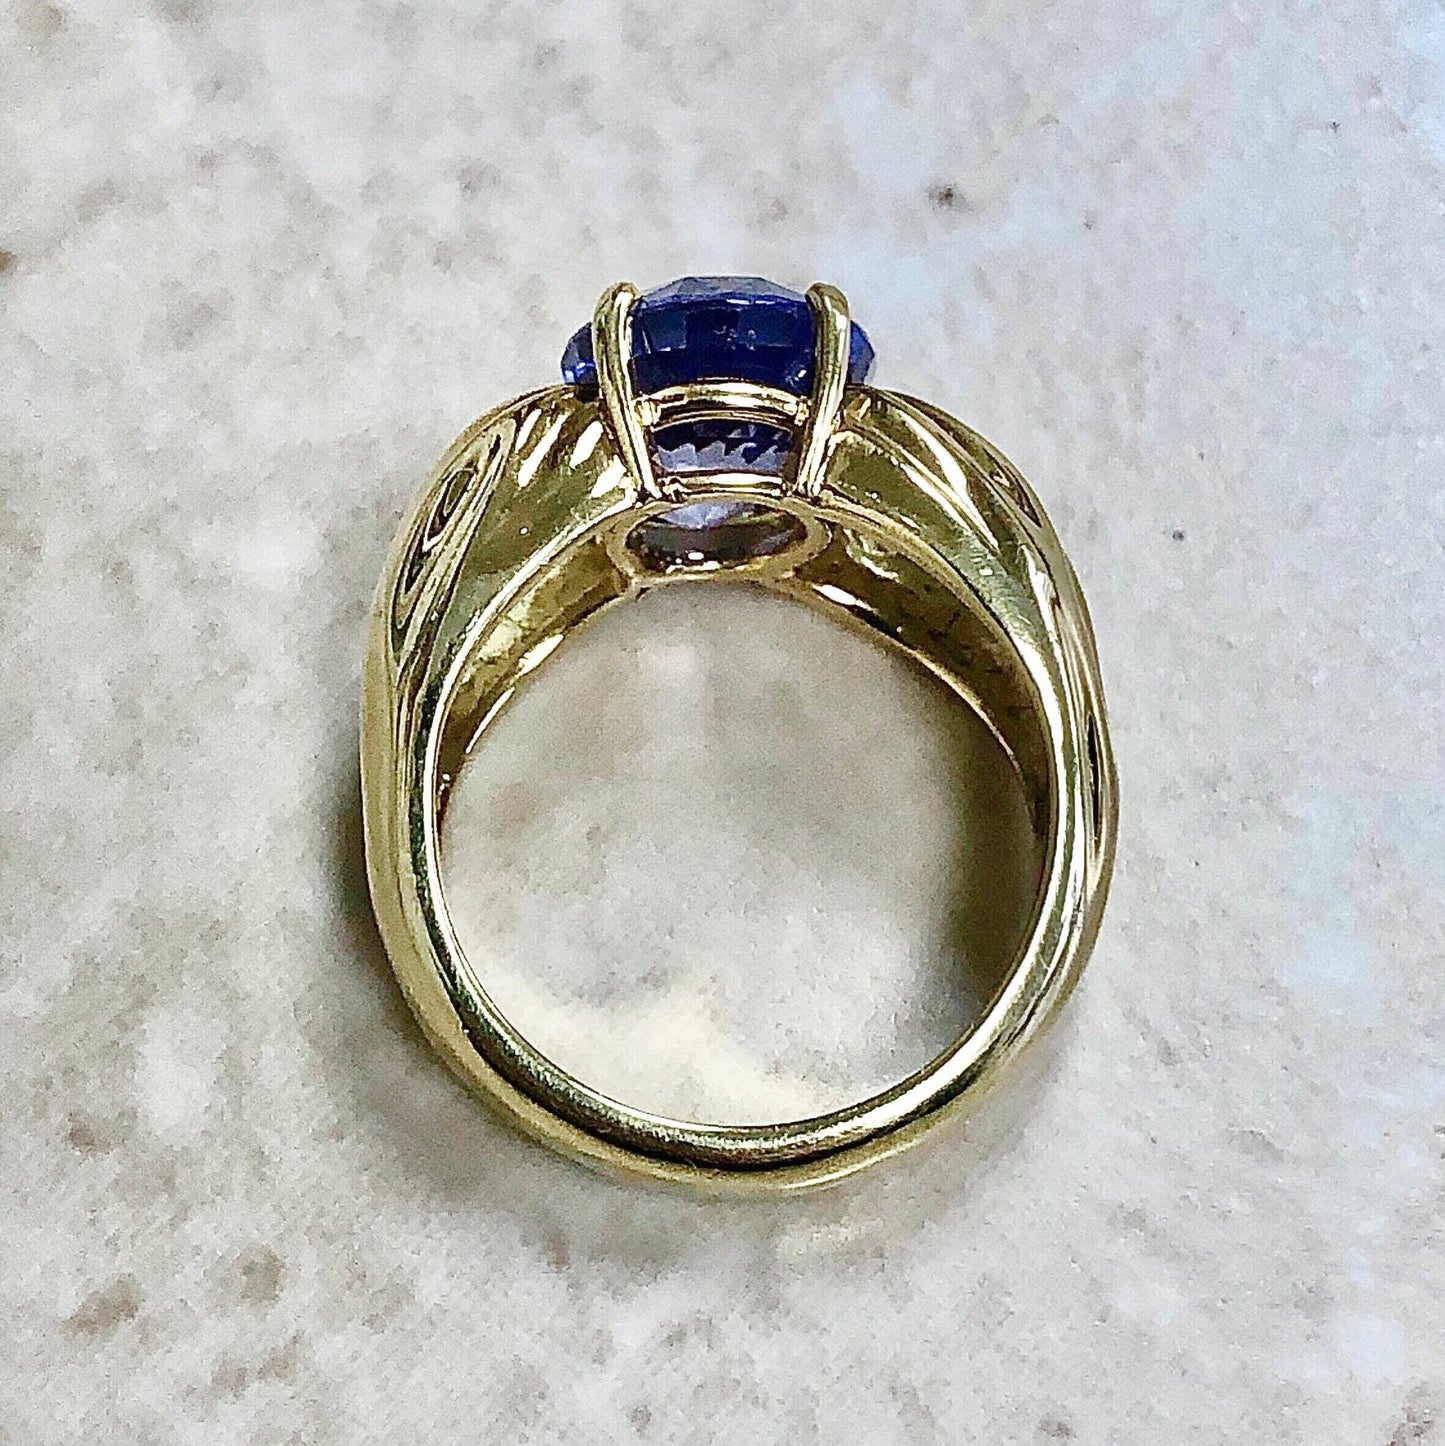 Very Fine Vintage 18K Untreated Sapphire Ring By Carvin French Jewelers - Yellow Gold Cocktail Ring - Engagement Ring - Size 5.5